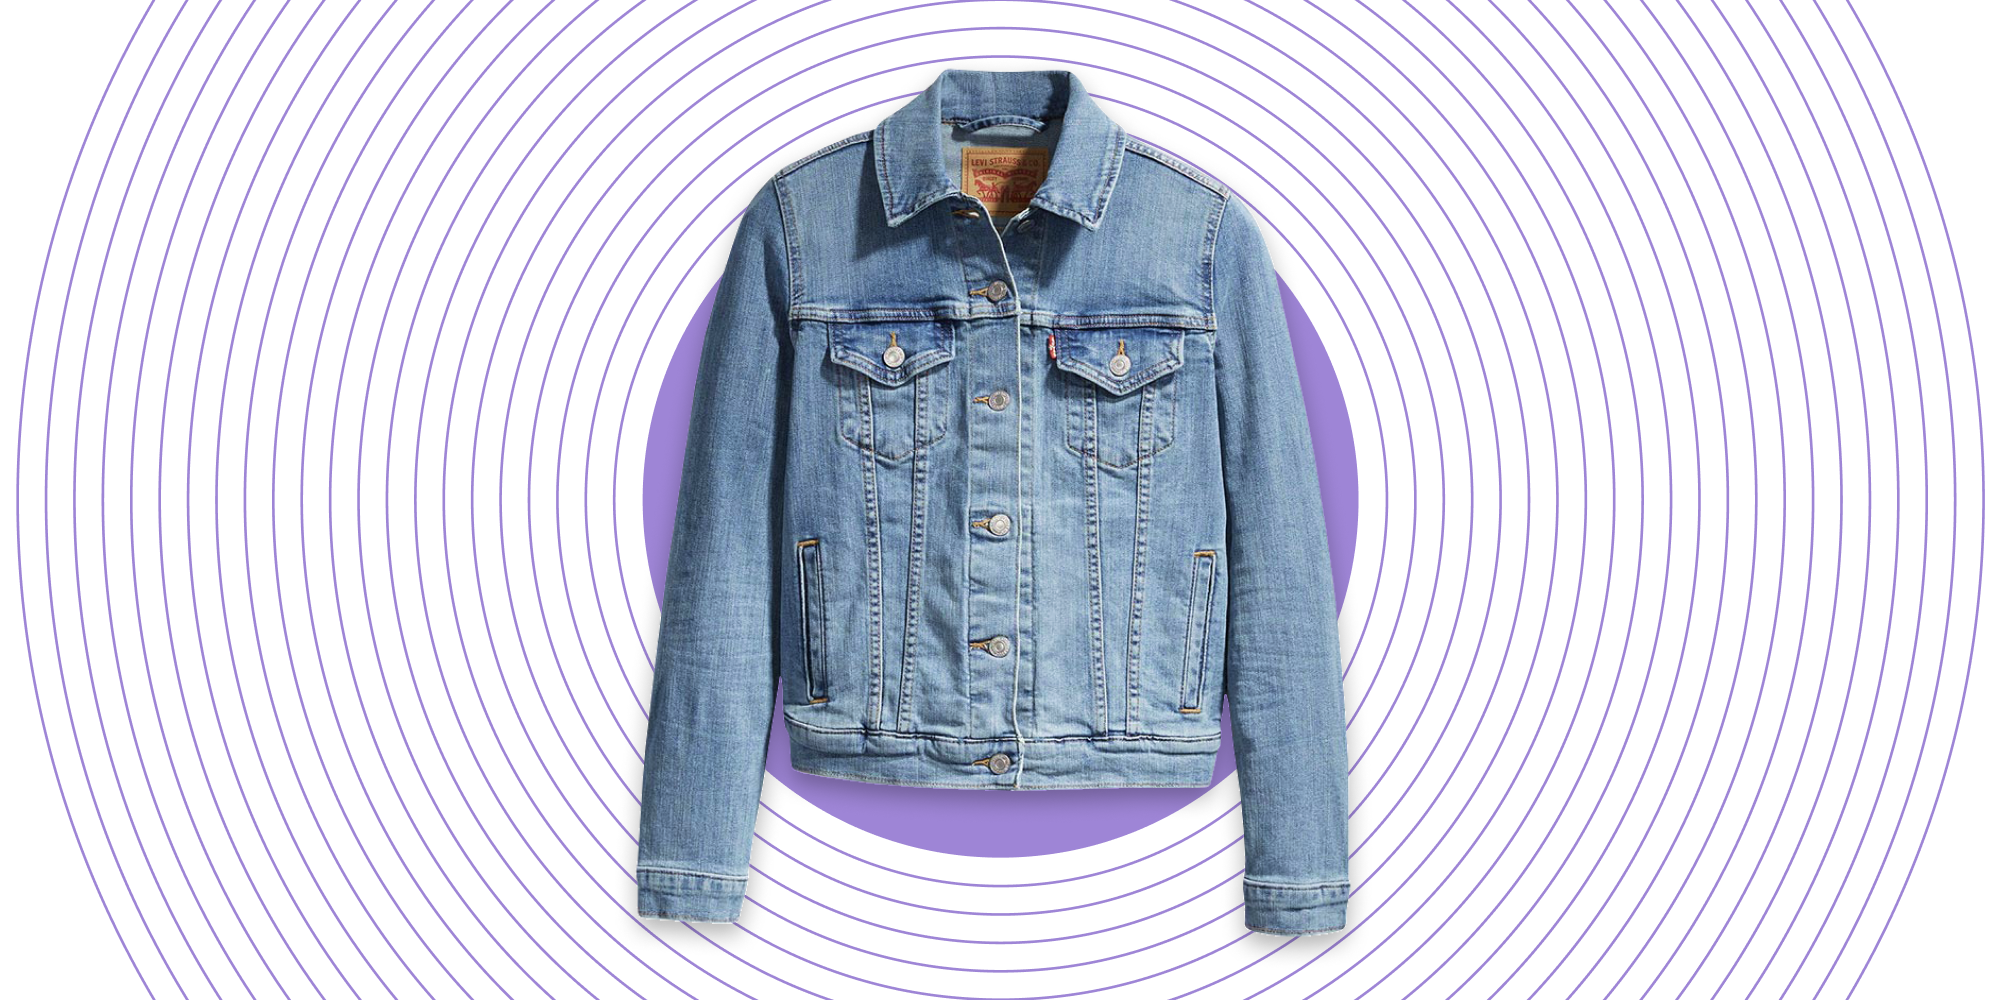 Amazon's Best-Selling Denim Shacket Is Easy to Layer and Perfect for Fall,  and It's on Sale